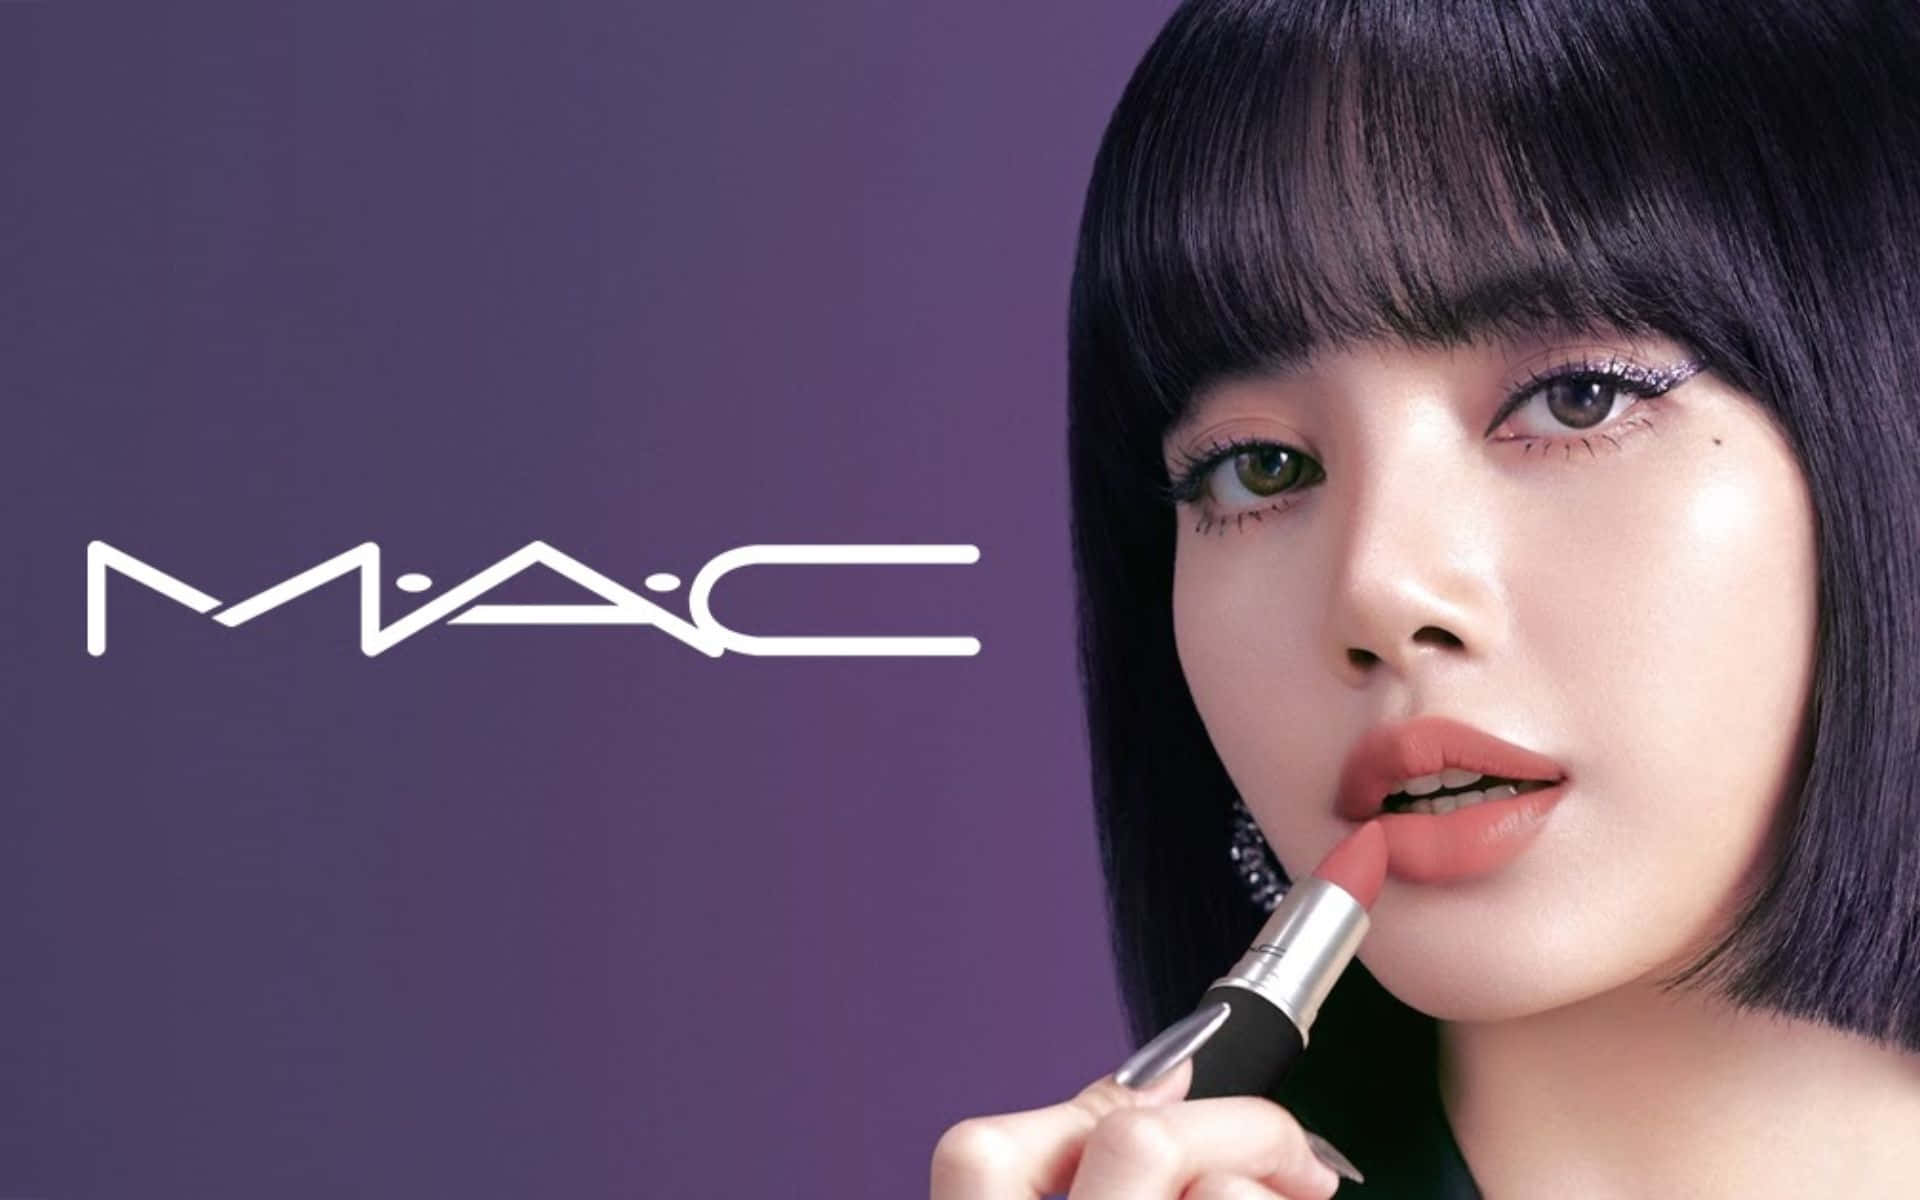 Enhance your daily look with a variety of products and shades from MAC Cosmetics